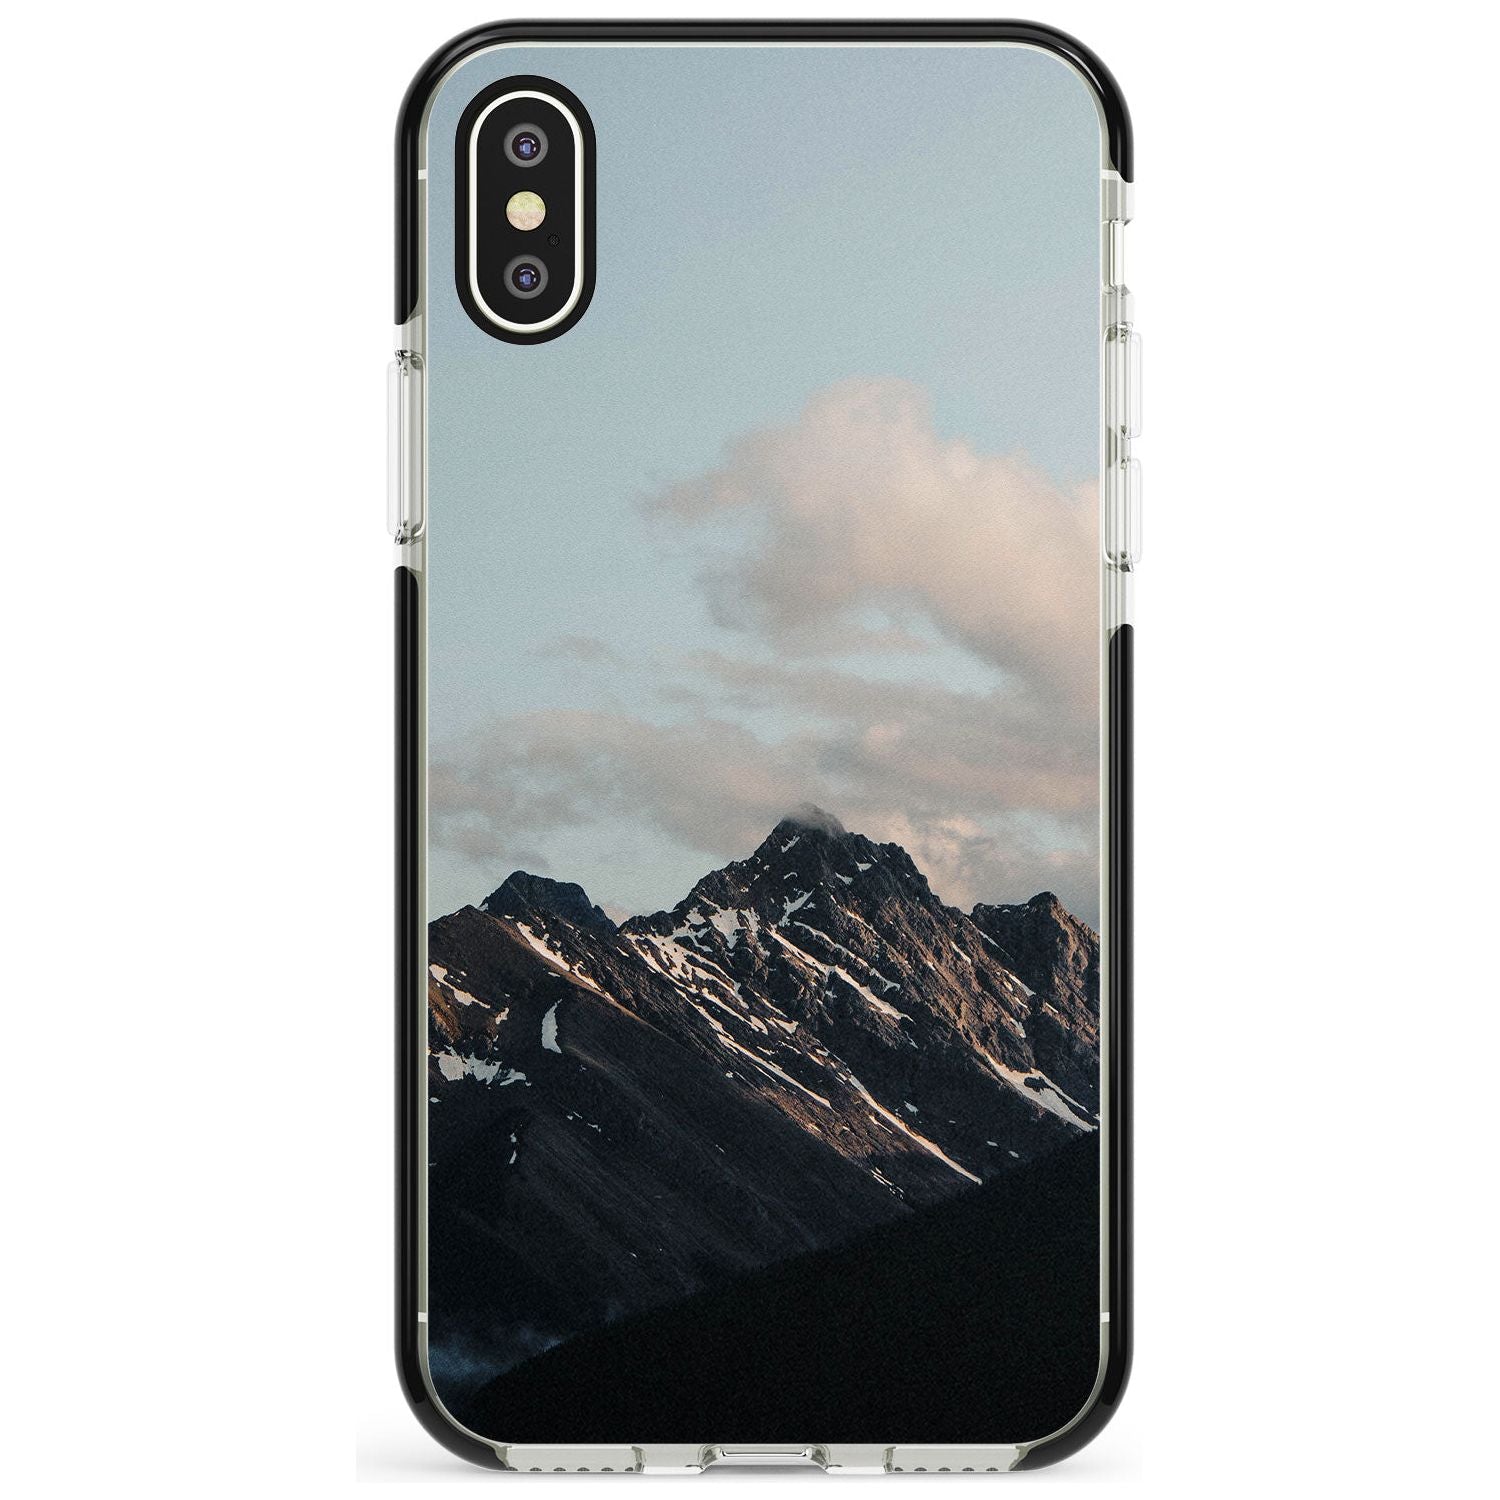 Mountain Range Photograph Black Impact Phone Case for iPhone X XS Max XR